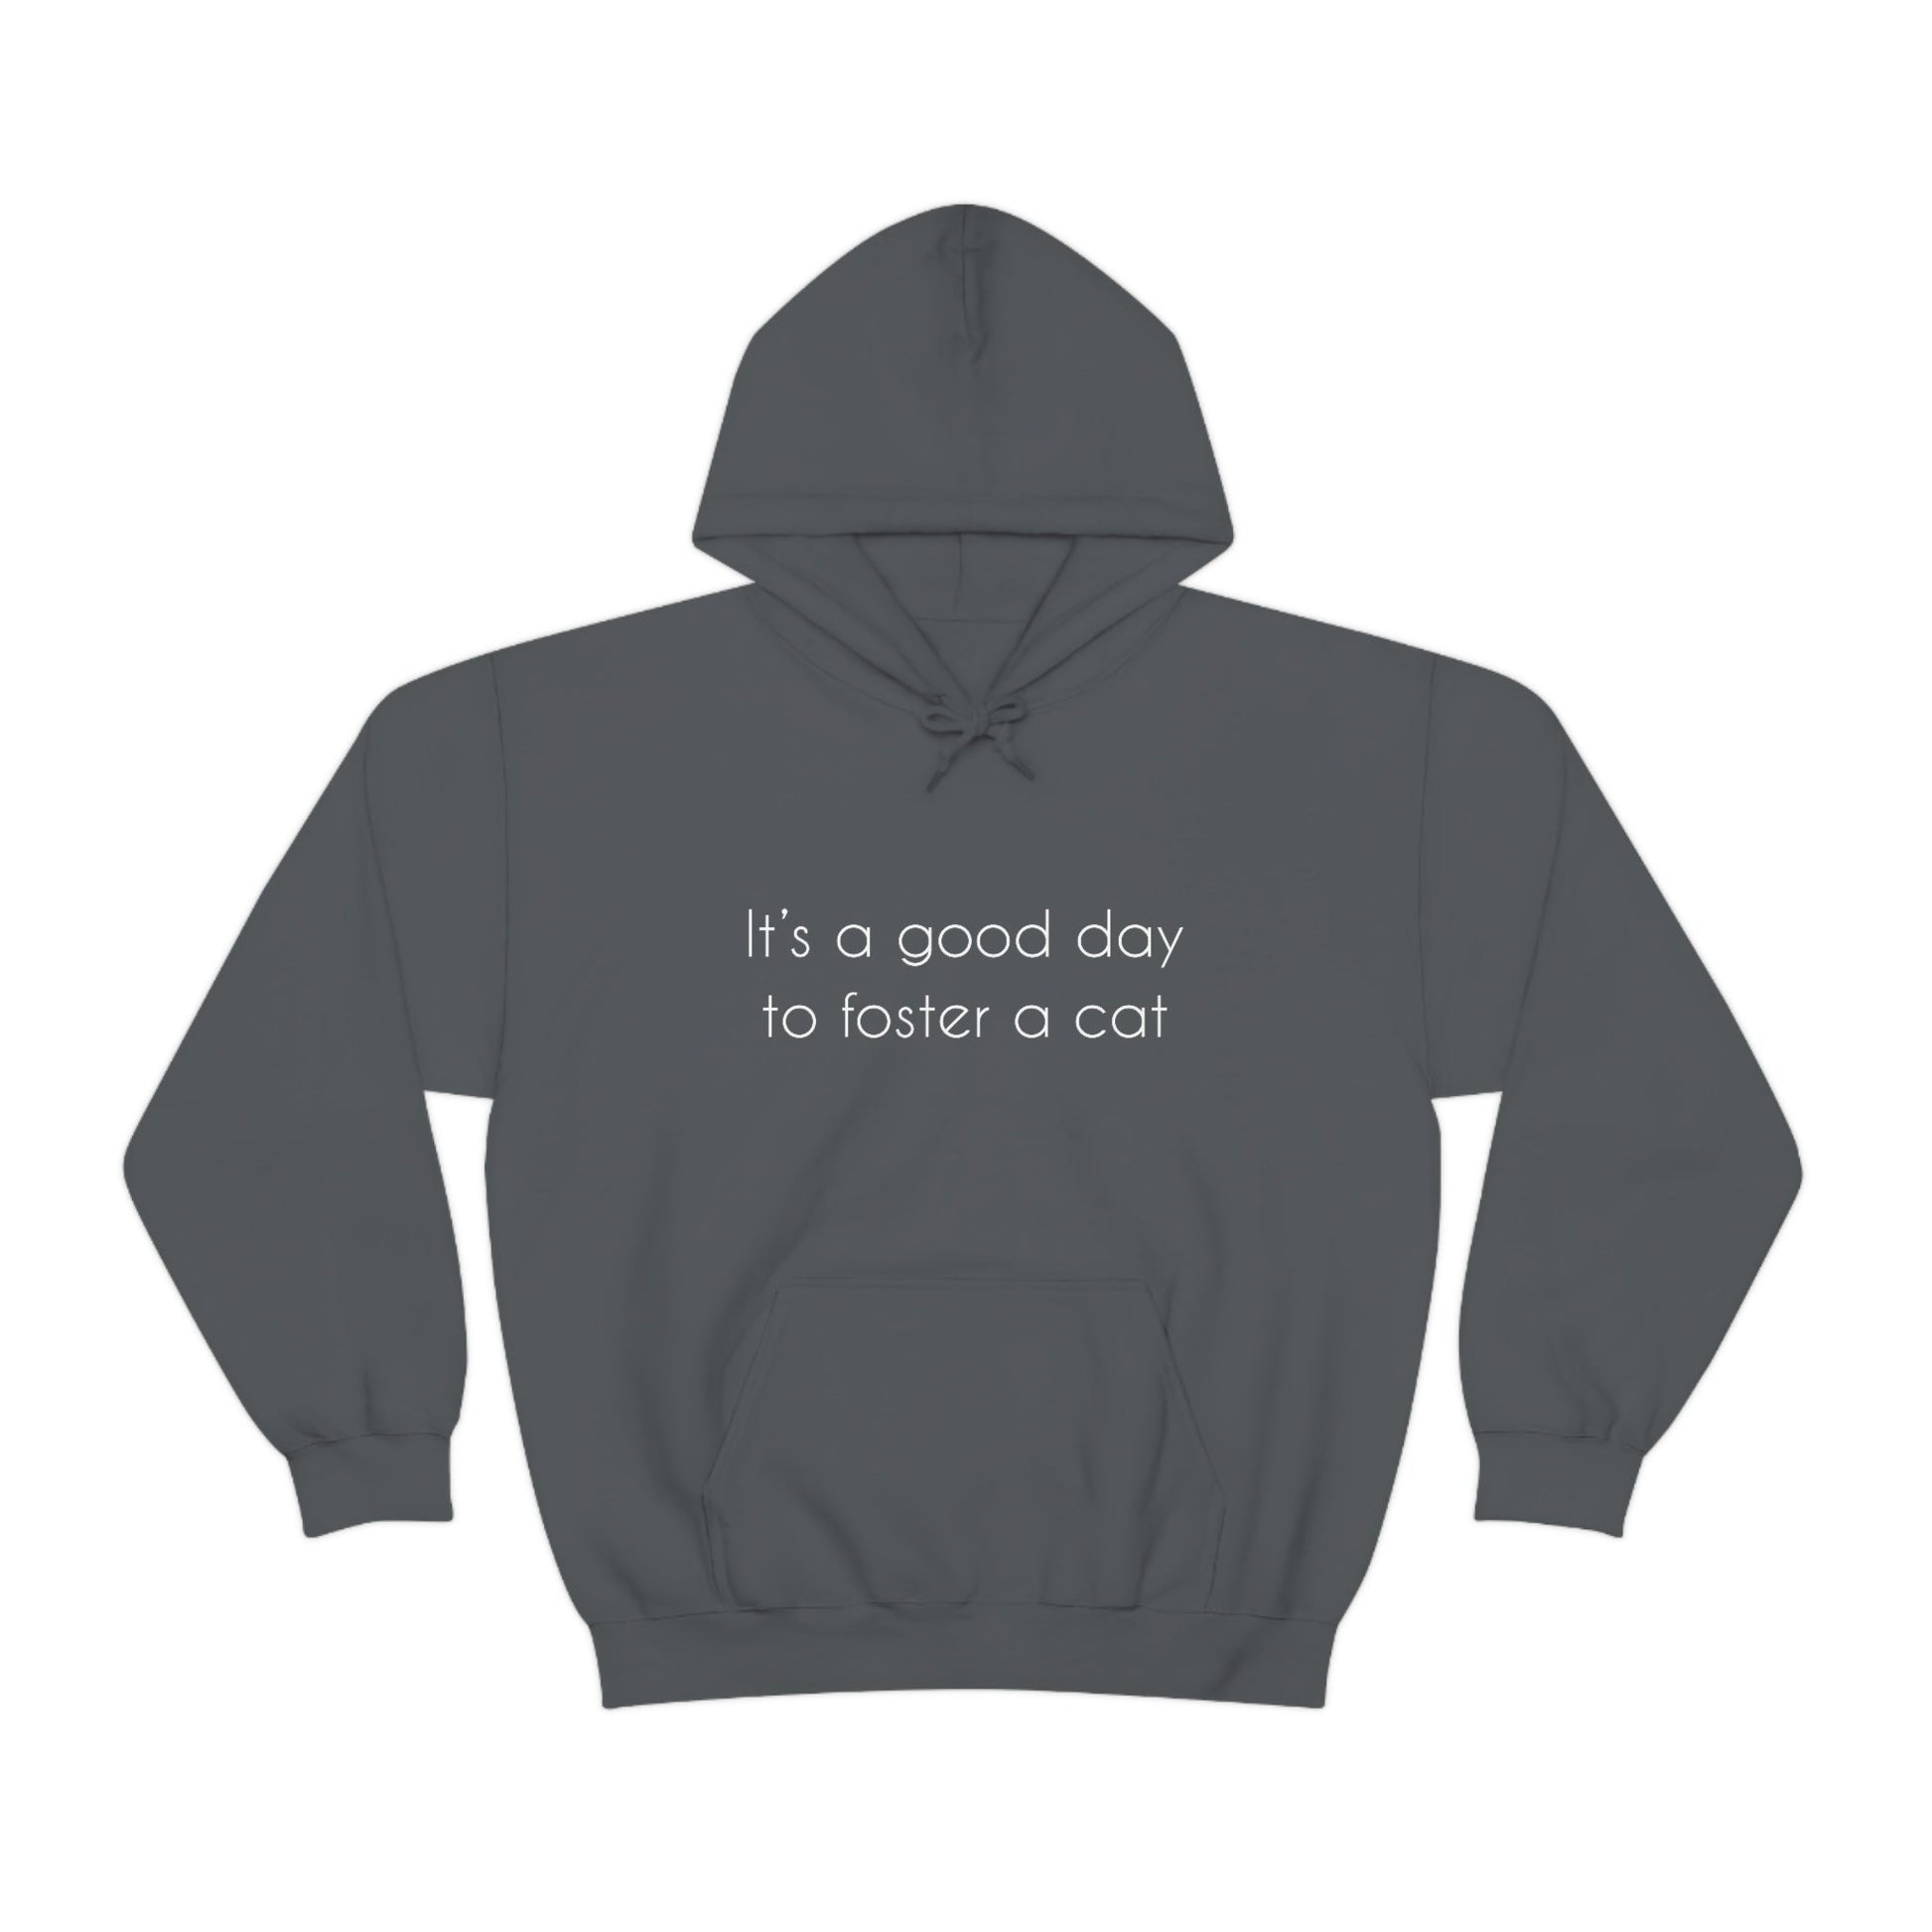 It's A Good Day To Foster A Cat | Hooded Sweatshirt - Detezi Designs-19495169005339865365